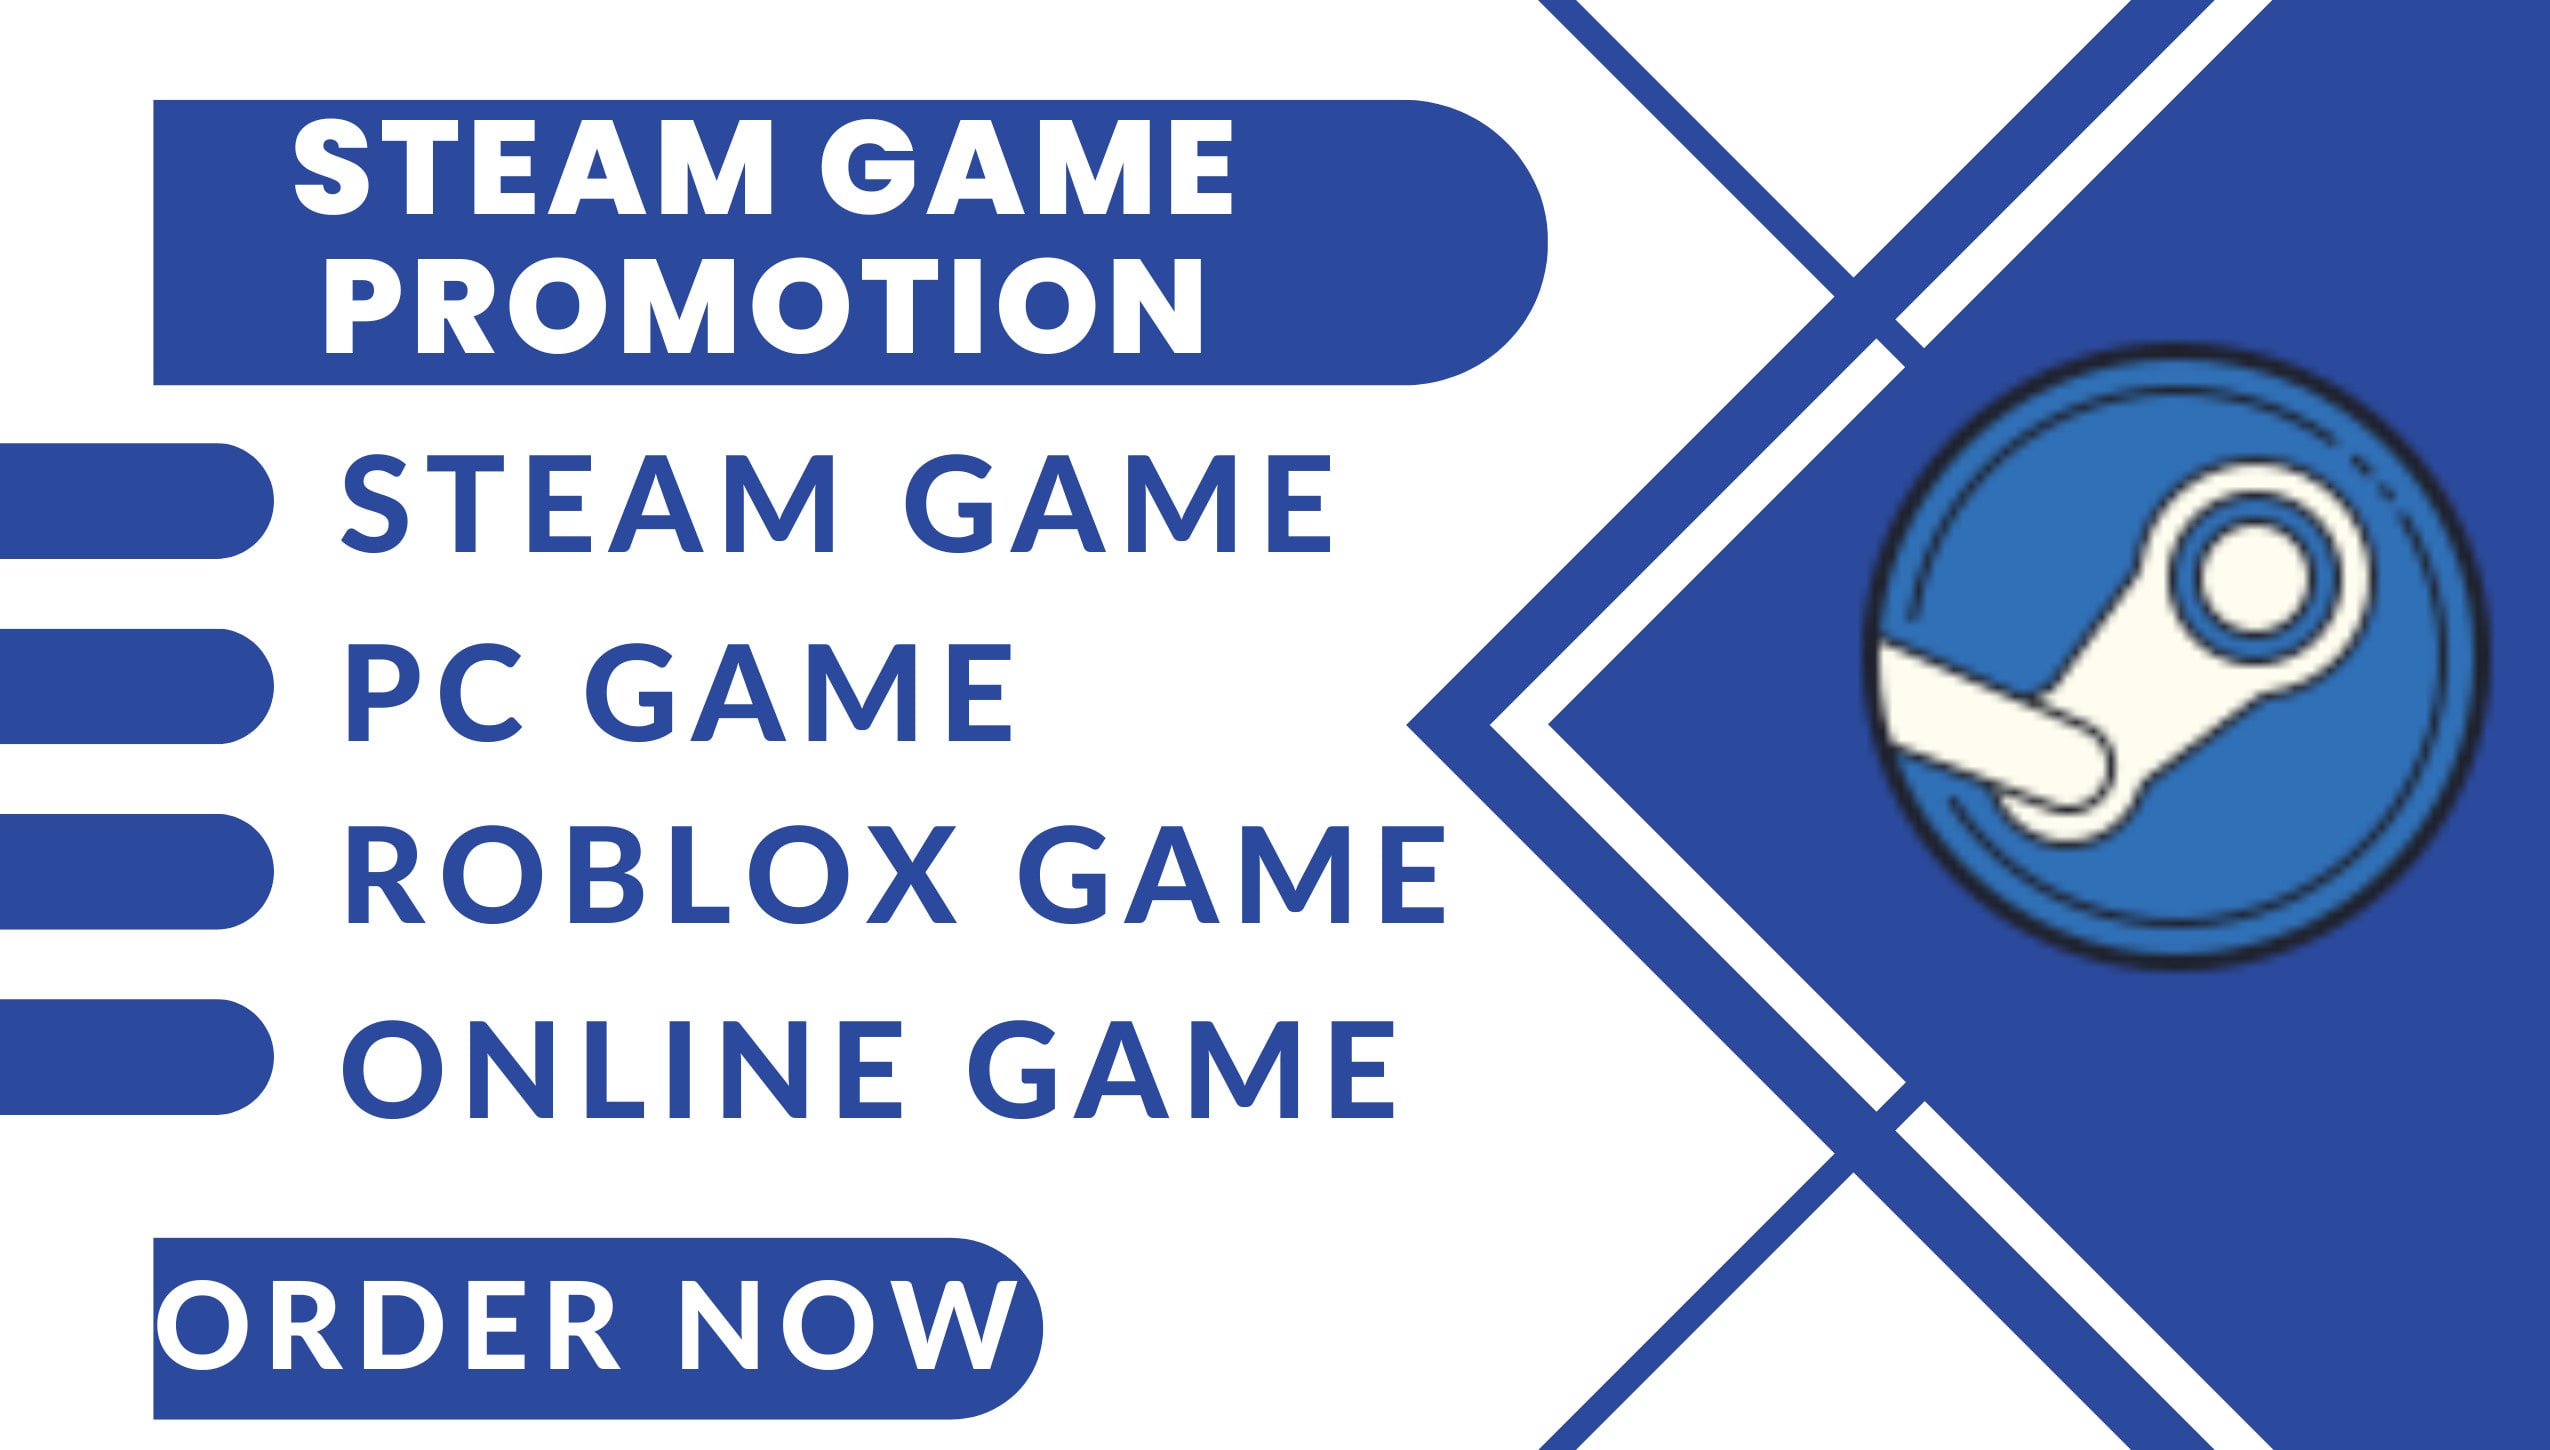 Prmote steam game pc game roblox game online game to active gaming audience  by Marketinbase